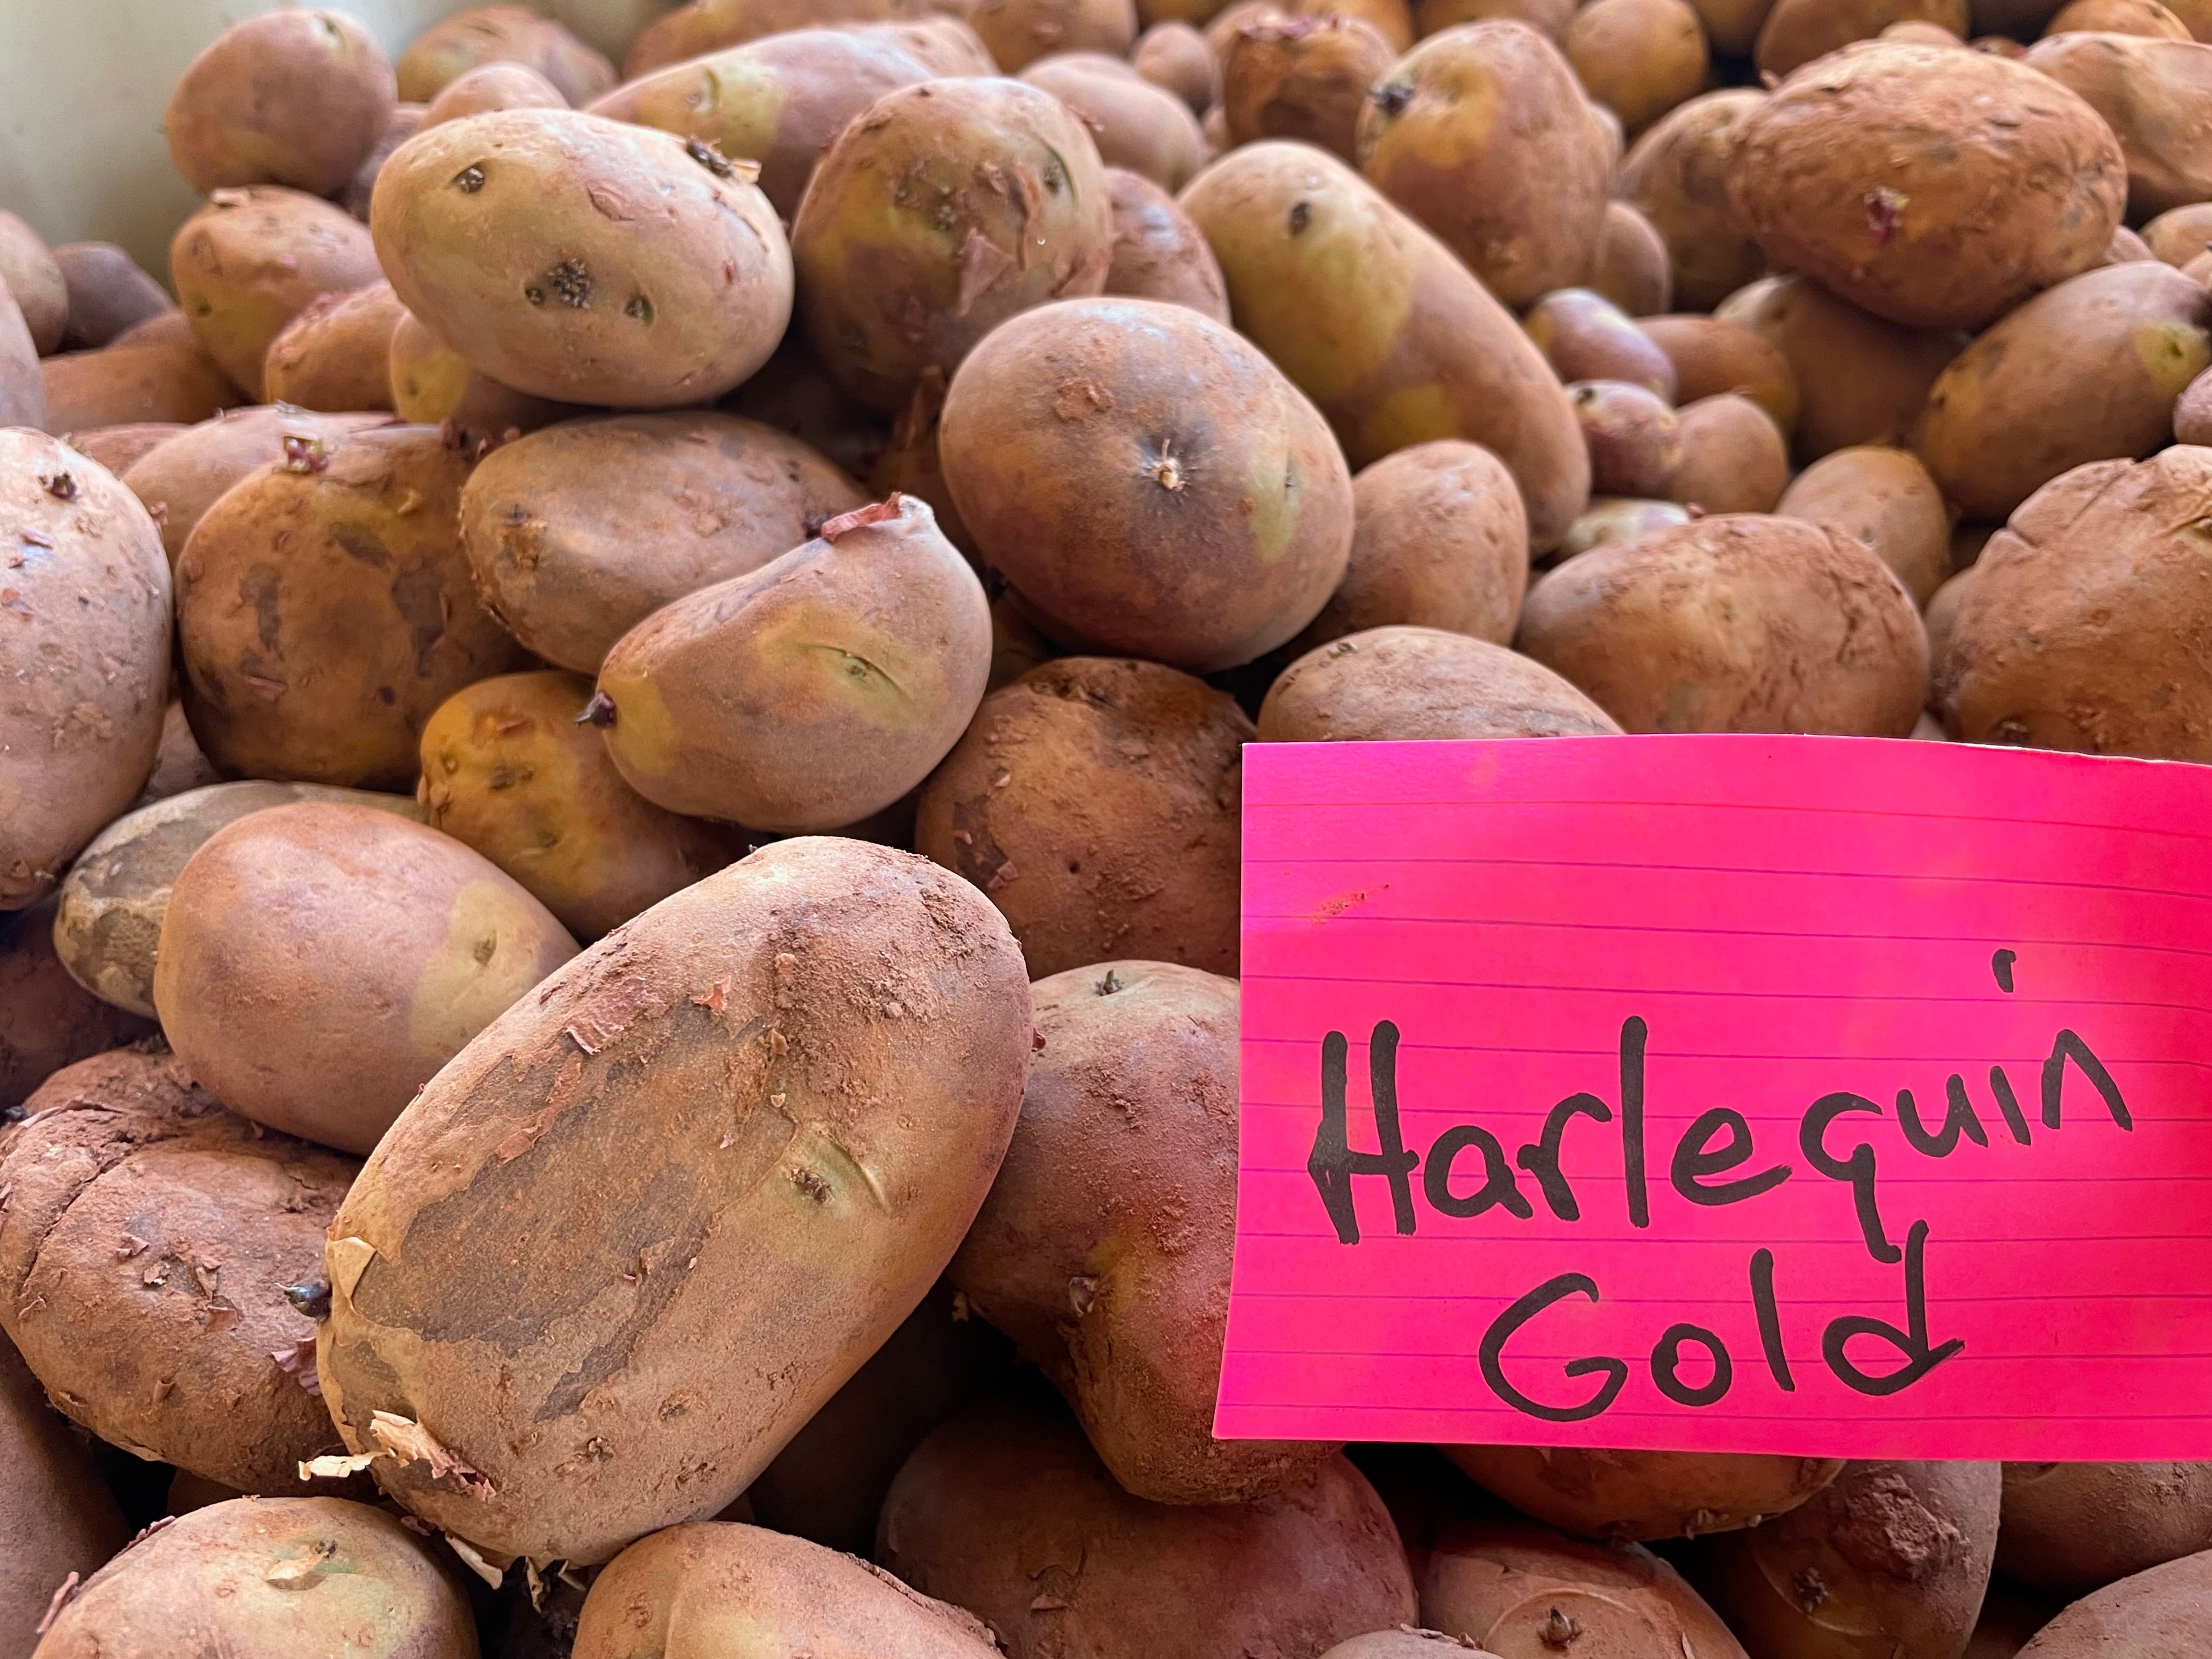 Harlequin Gold Seed Potatoes (non-commercial)